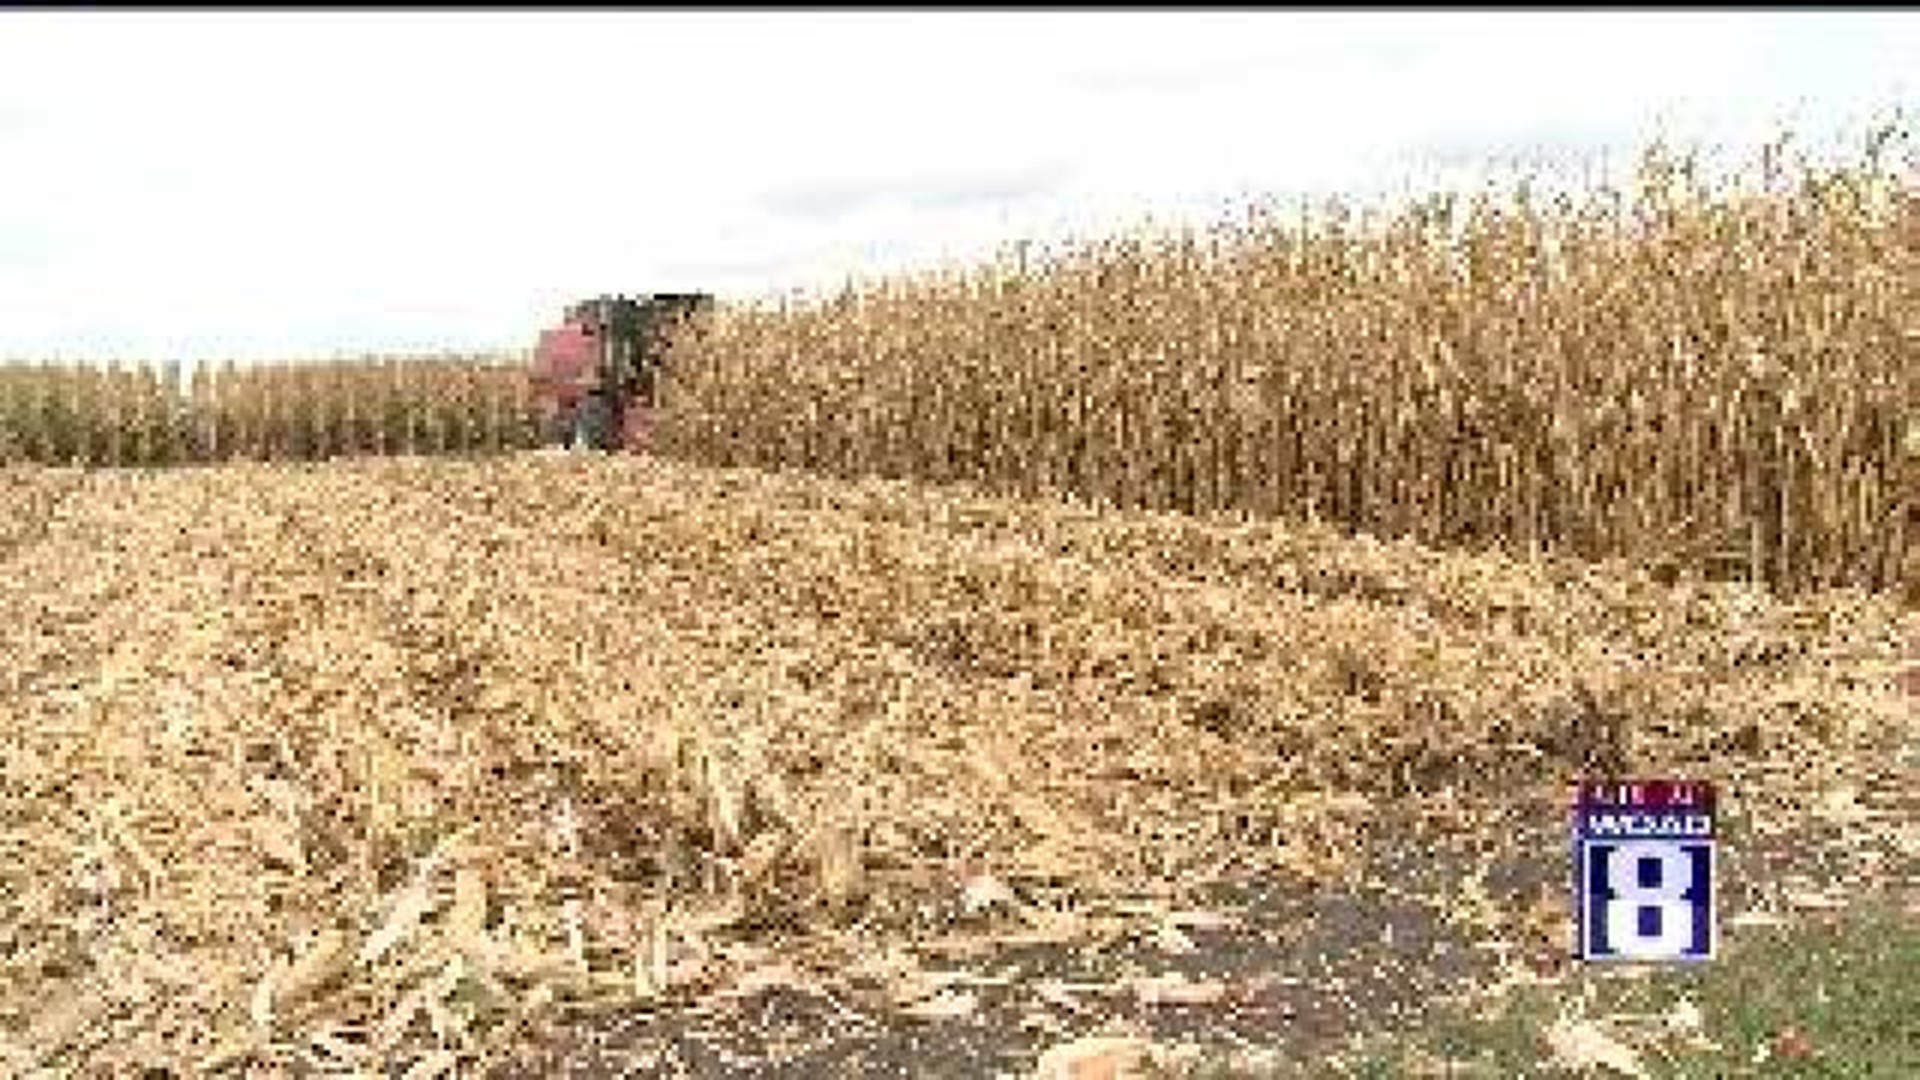 Ag in the AM: Scott County Farmland Among the Priciest